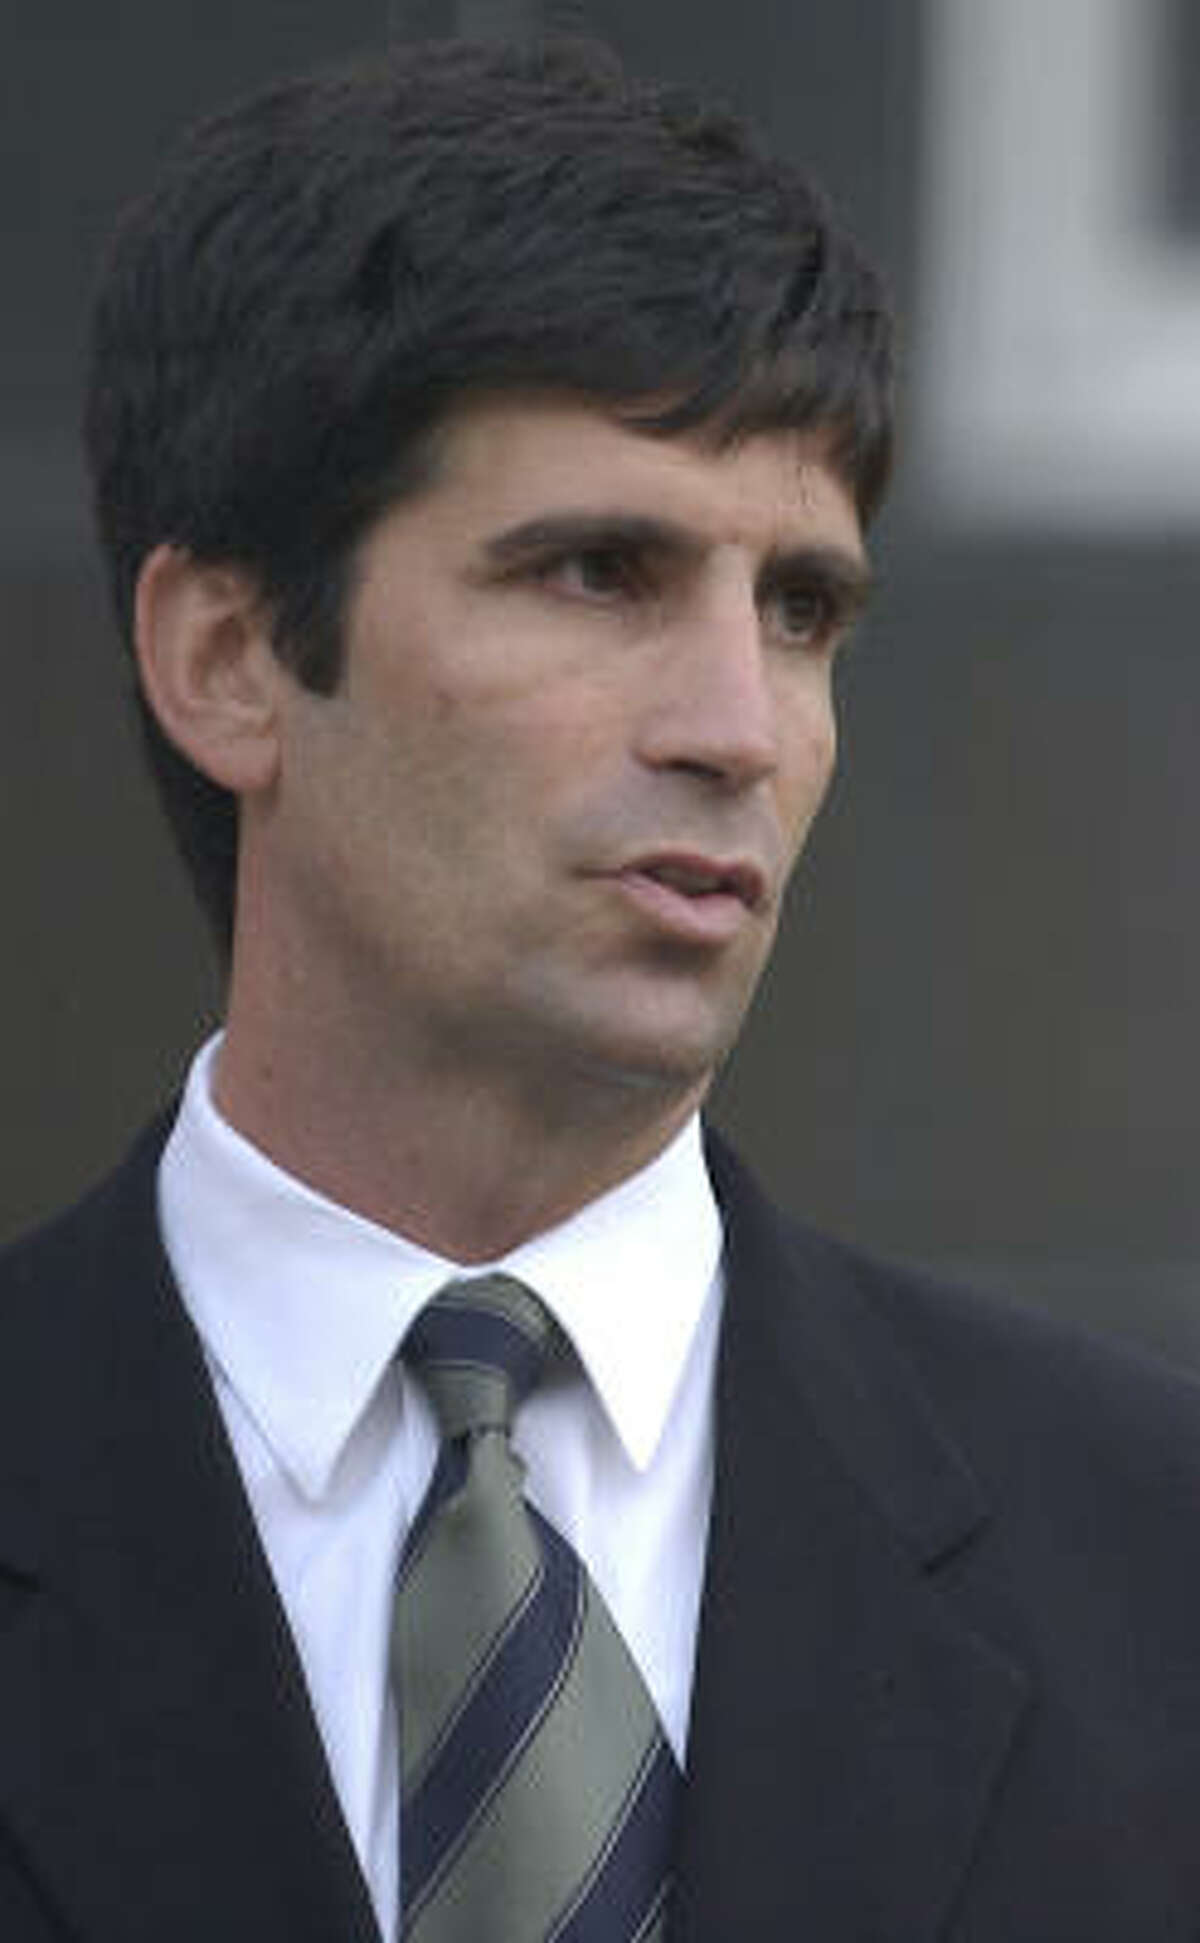 Former Enron executive Michael Kopper was sentenced for 3 years and 1 month for his part in the fall of Enron.